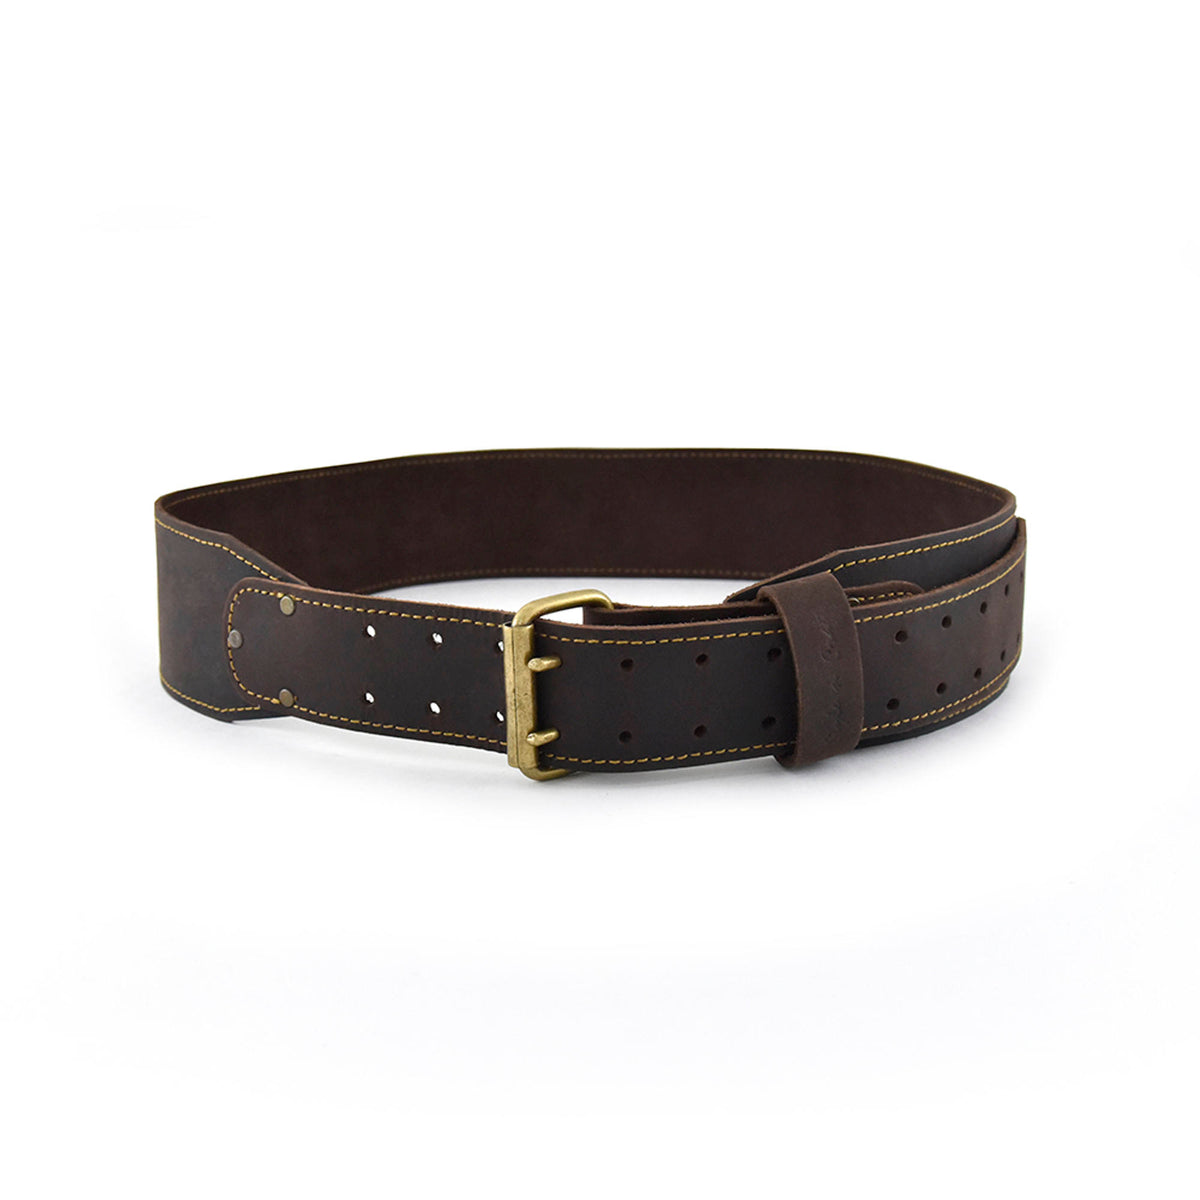 3 Inch Wide Tapered Work Belt in Oiled Leather | Style n Craft | # 74054